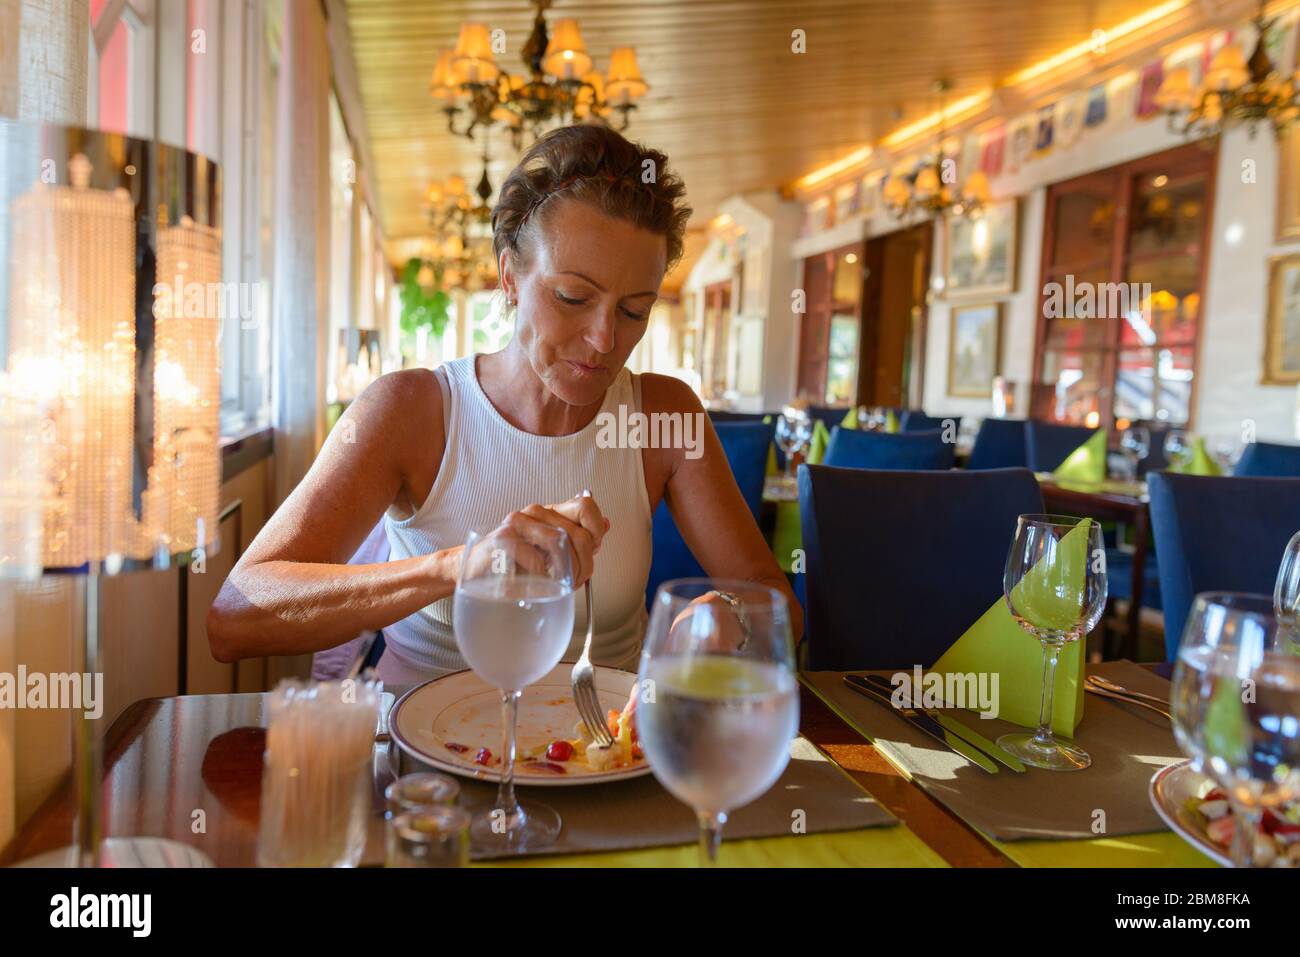 Mature beautiful woman with short hair eating at the restaurant Stock Photo